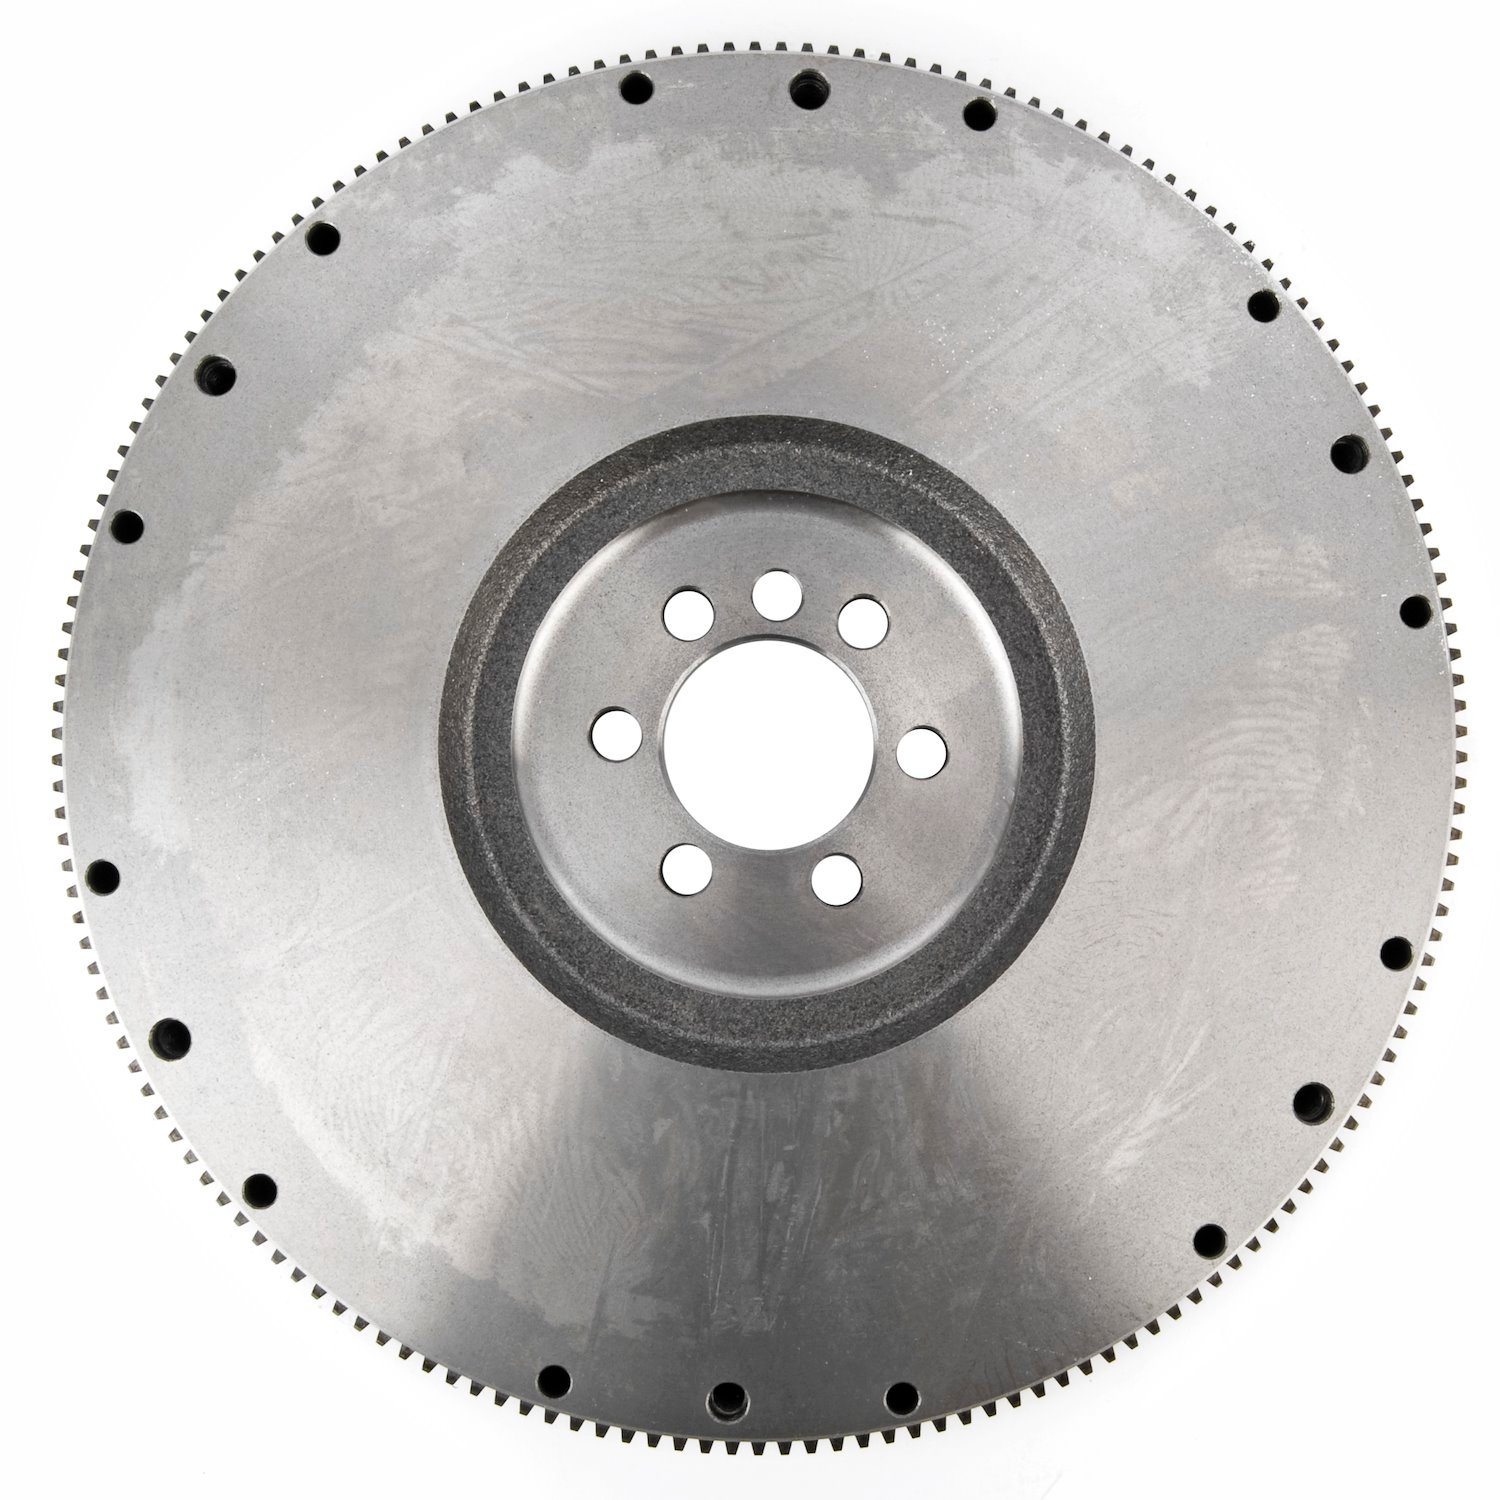 Flywheel for 1986-1993 Small Block Chevy 305 &